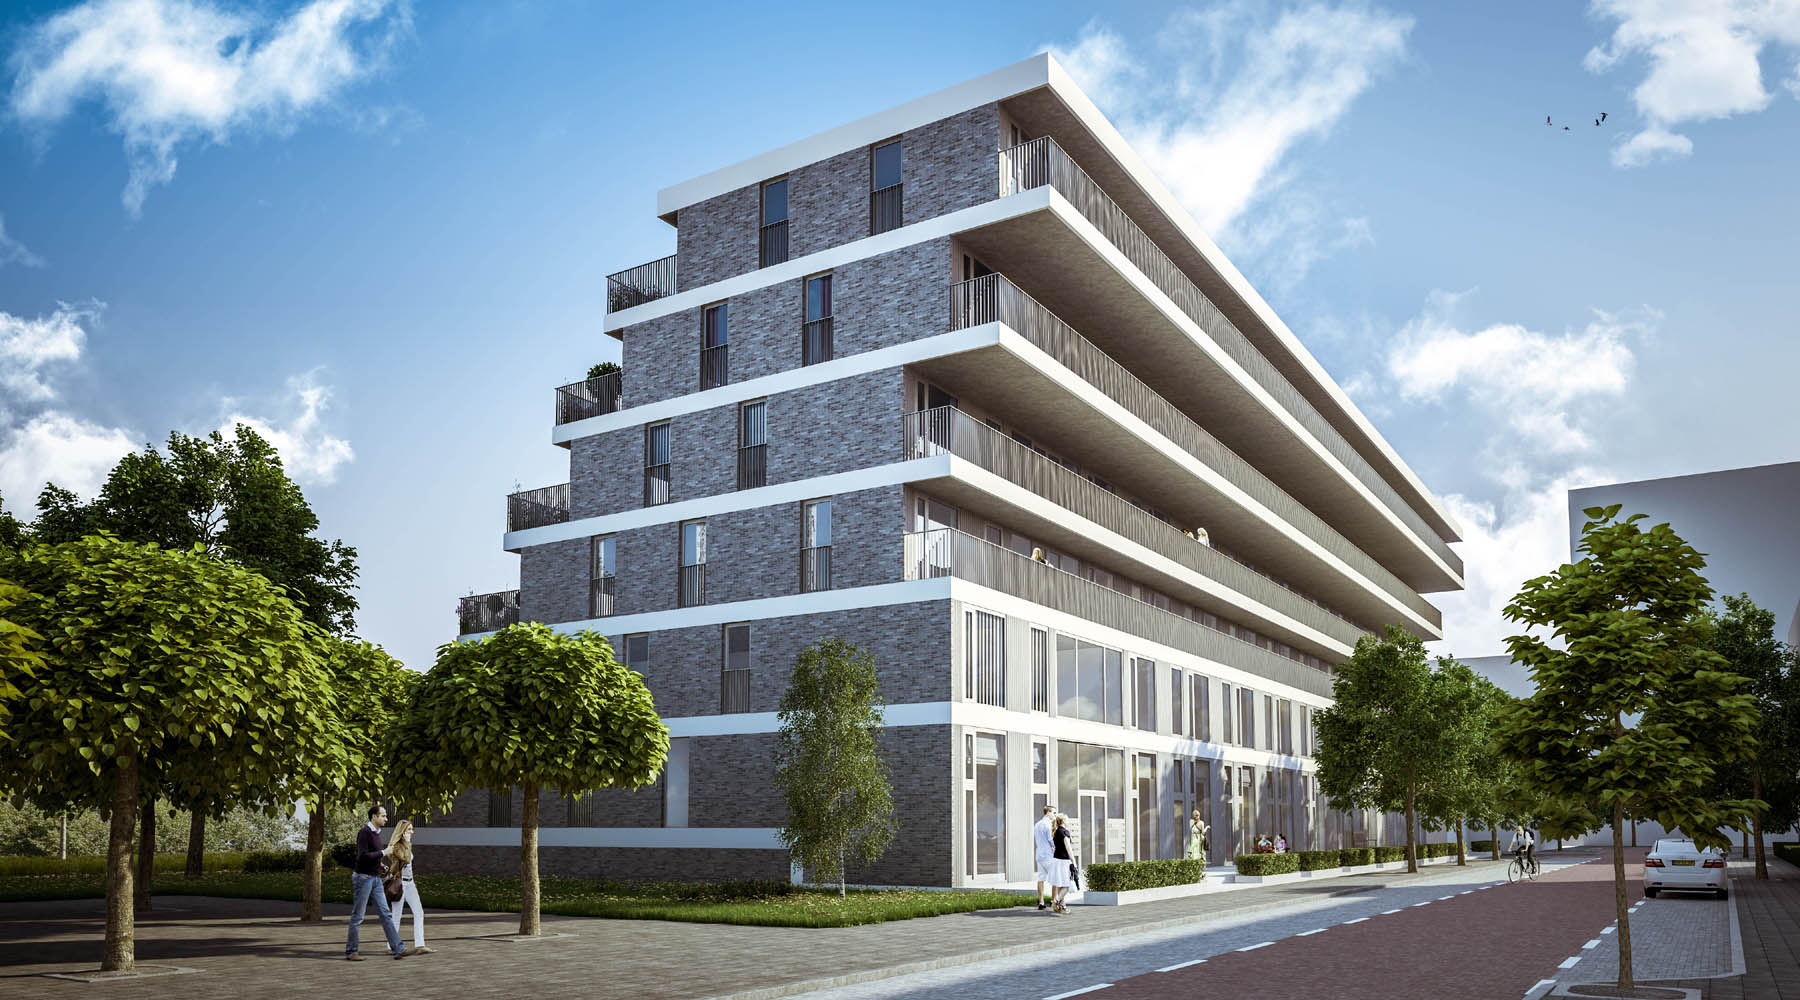 Terras OP ZUID: 50 terrace apartments near the Zuidas business district in Amsterdam, NOW FOR SALE